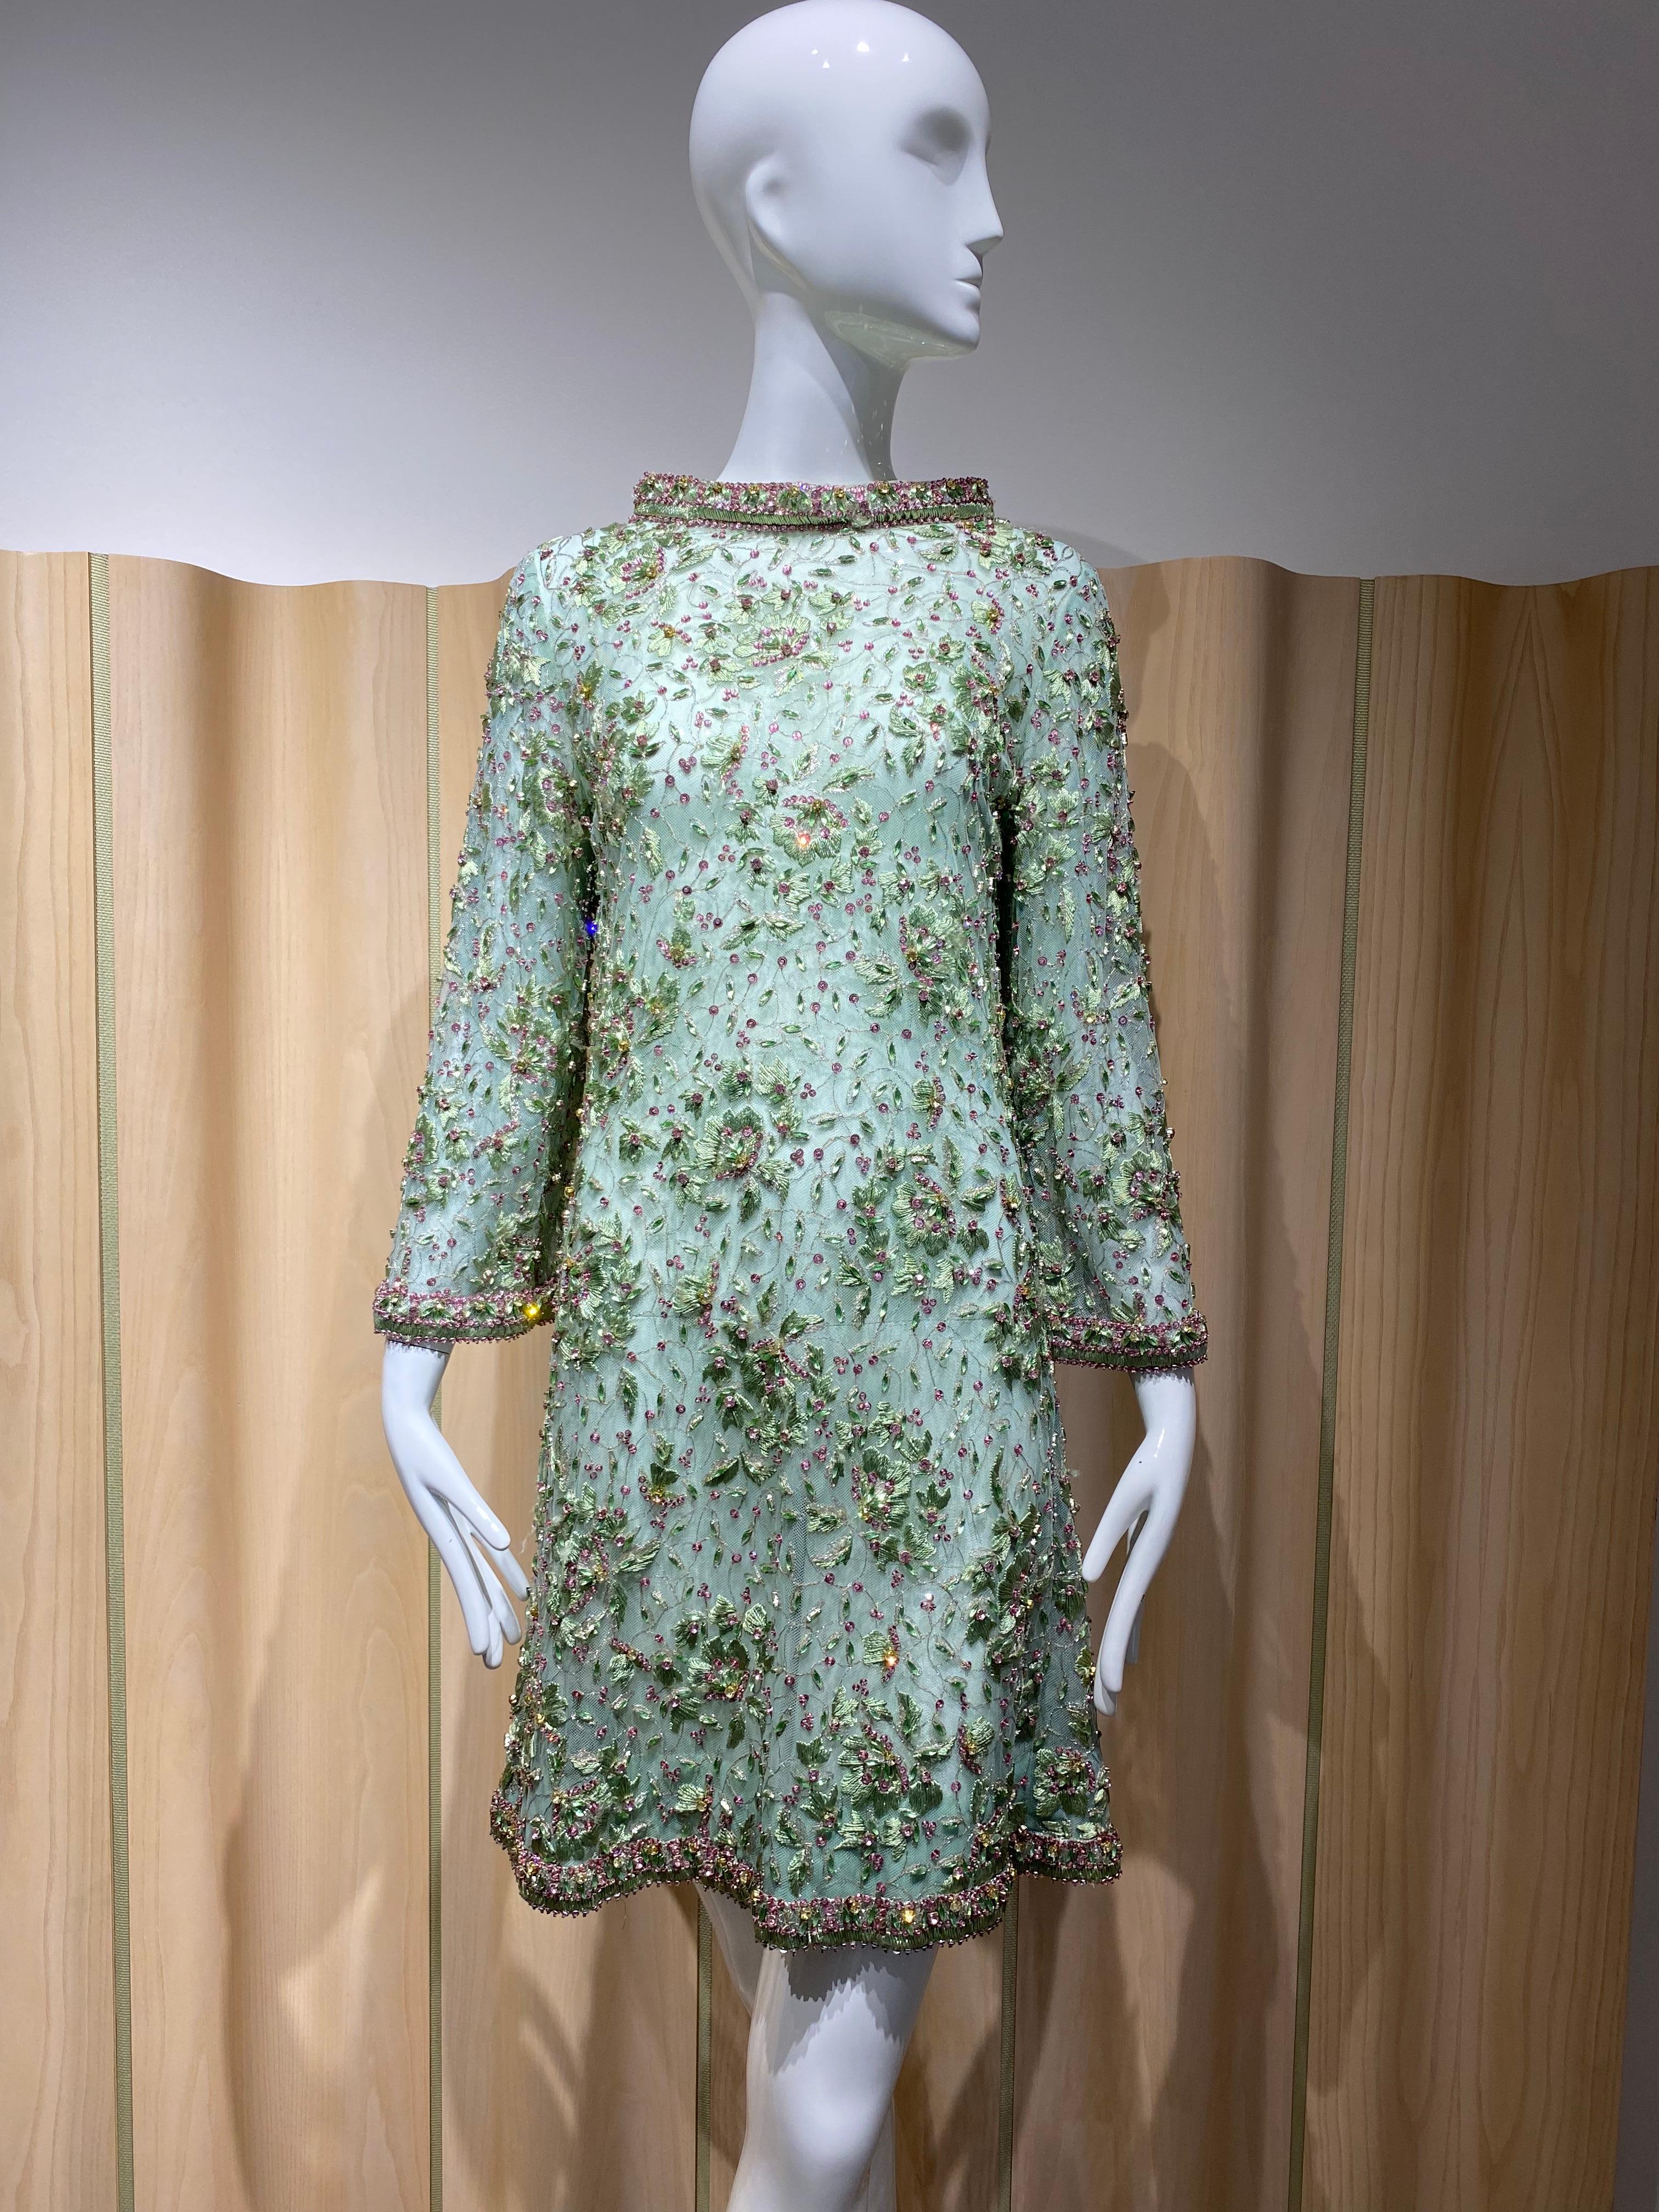 1960s Light Green Cocktail  Dress embellished with Rhinestones  1